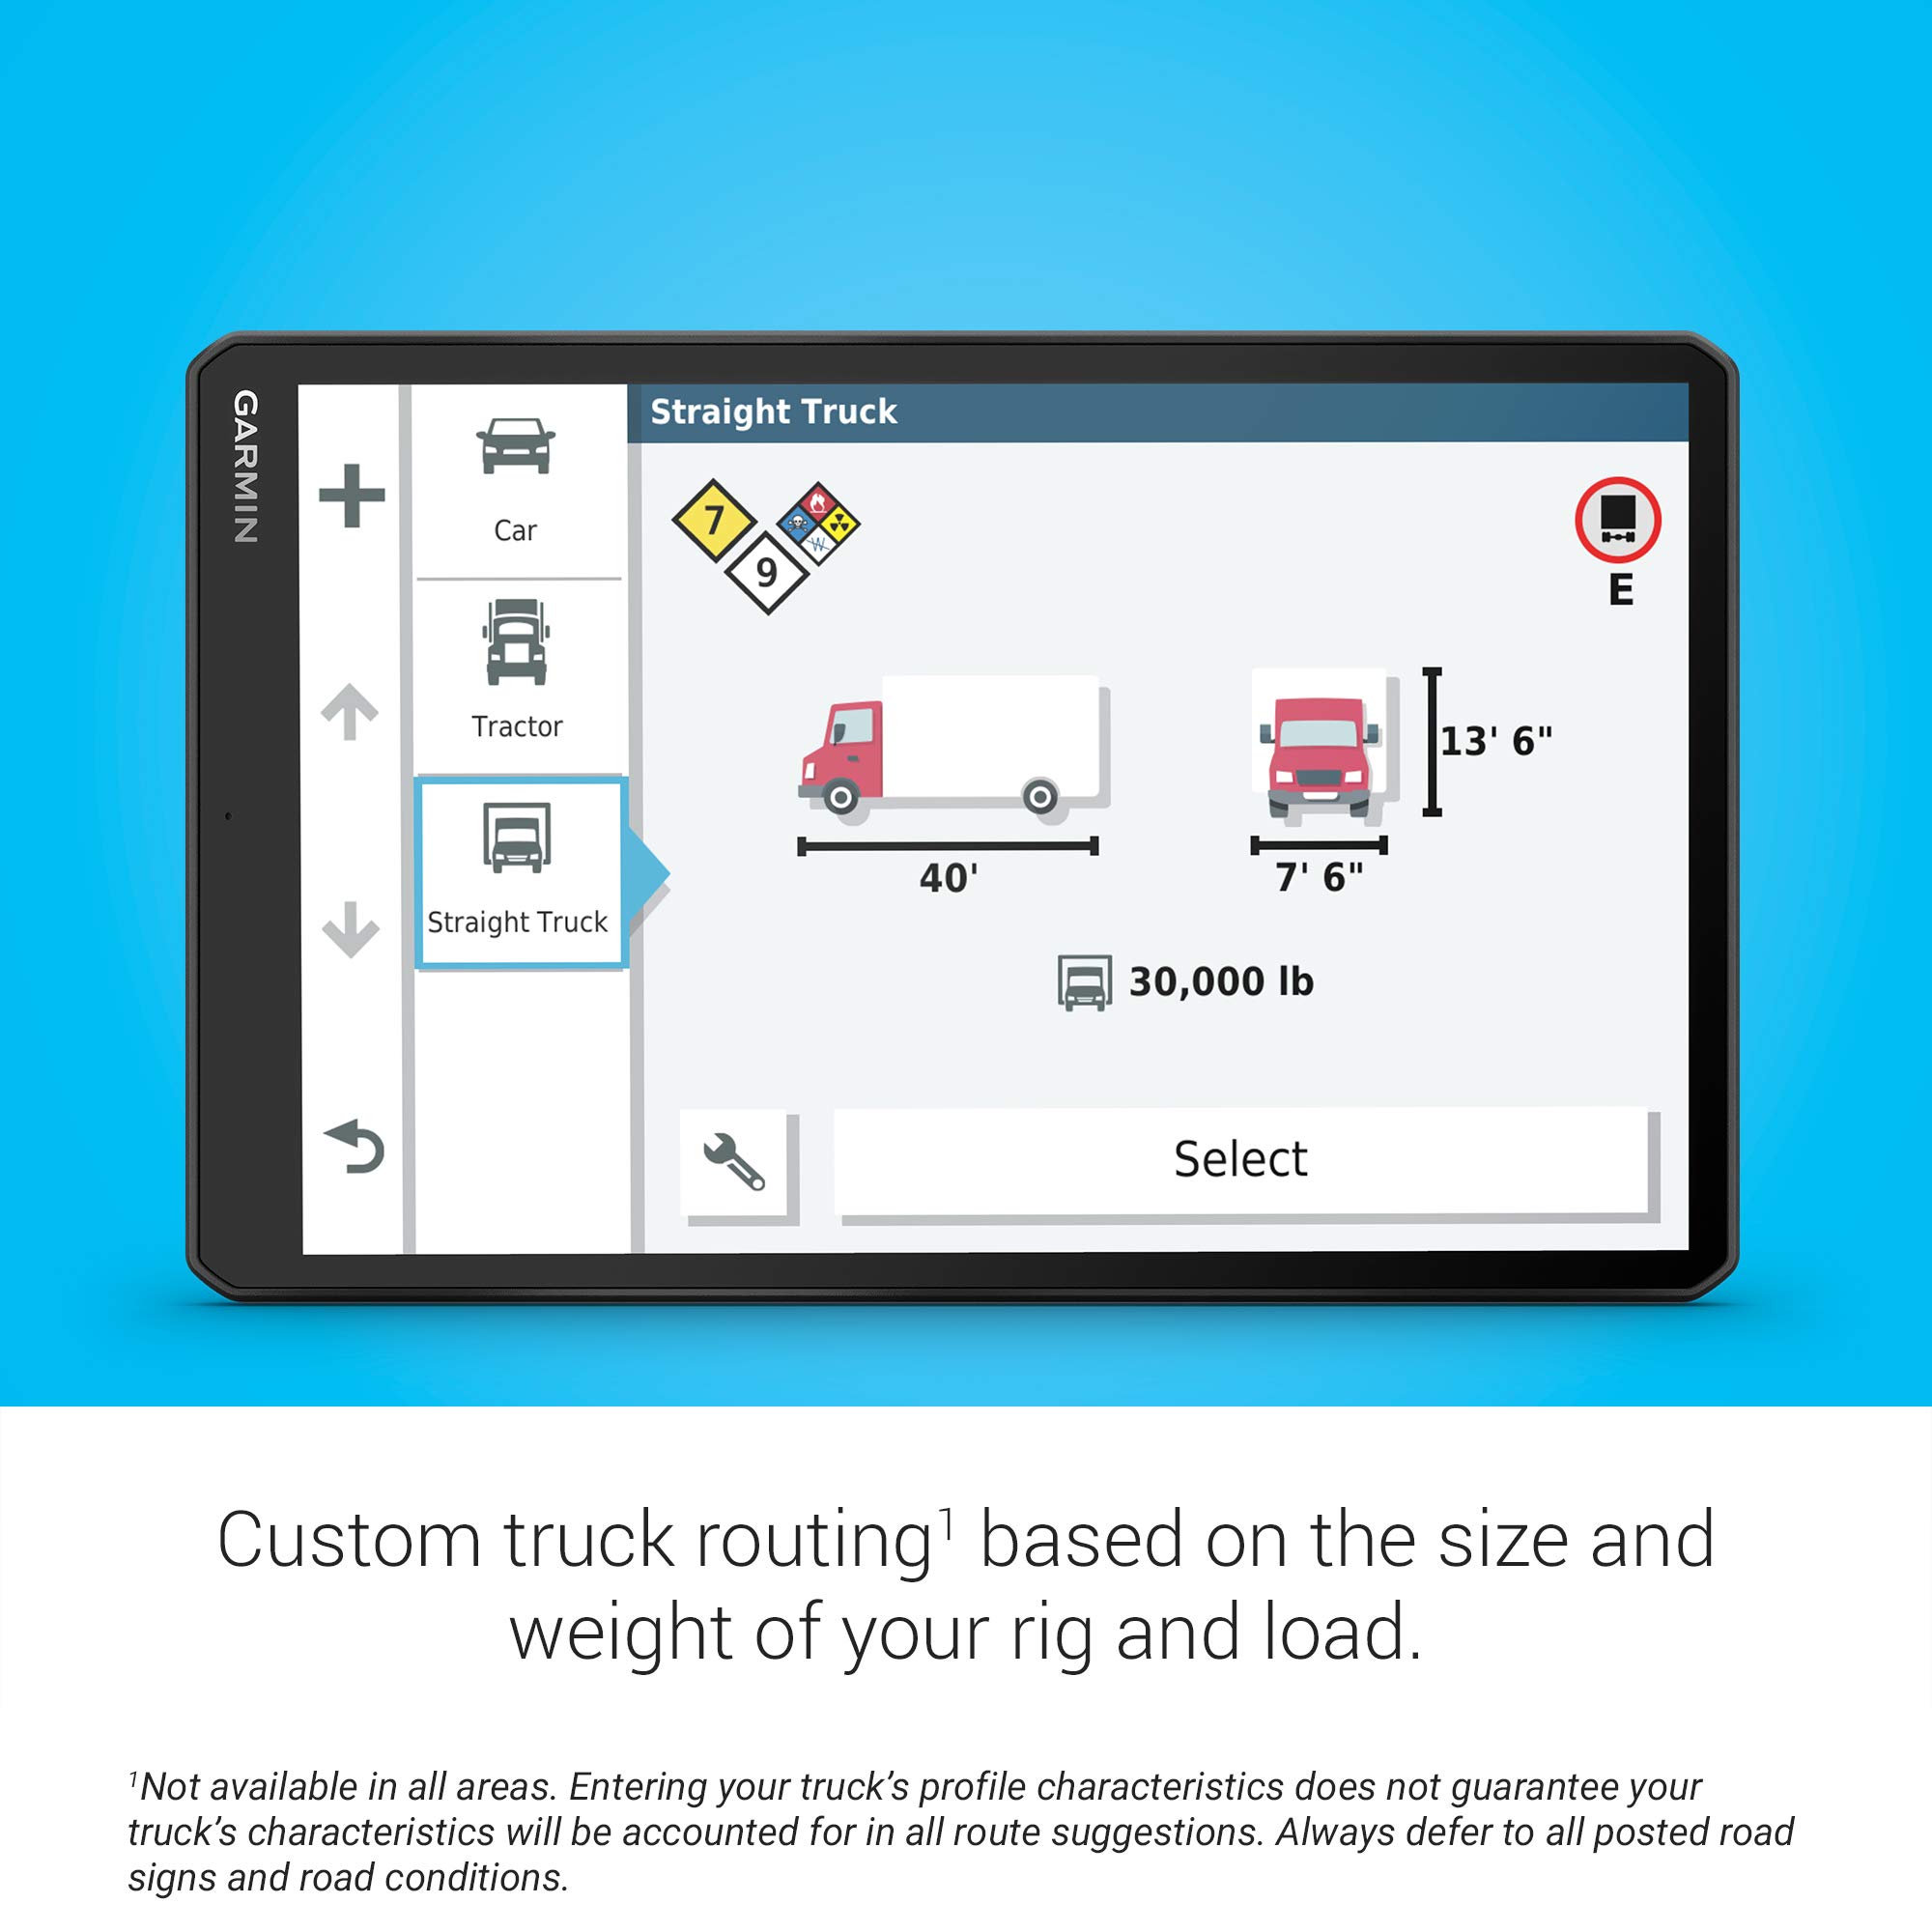 Garmin dēzl OTR1000, 10-inch GPS Truck Navigator, Easy-to-read Touchscreen Display, Custom Truck Routing and Load-to-dock Guidance